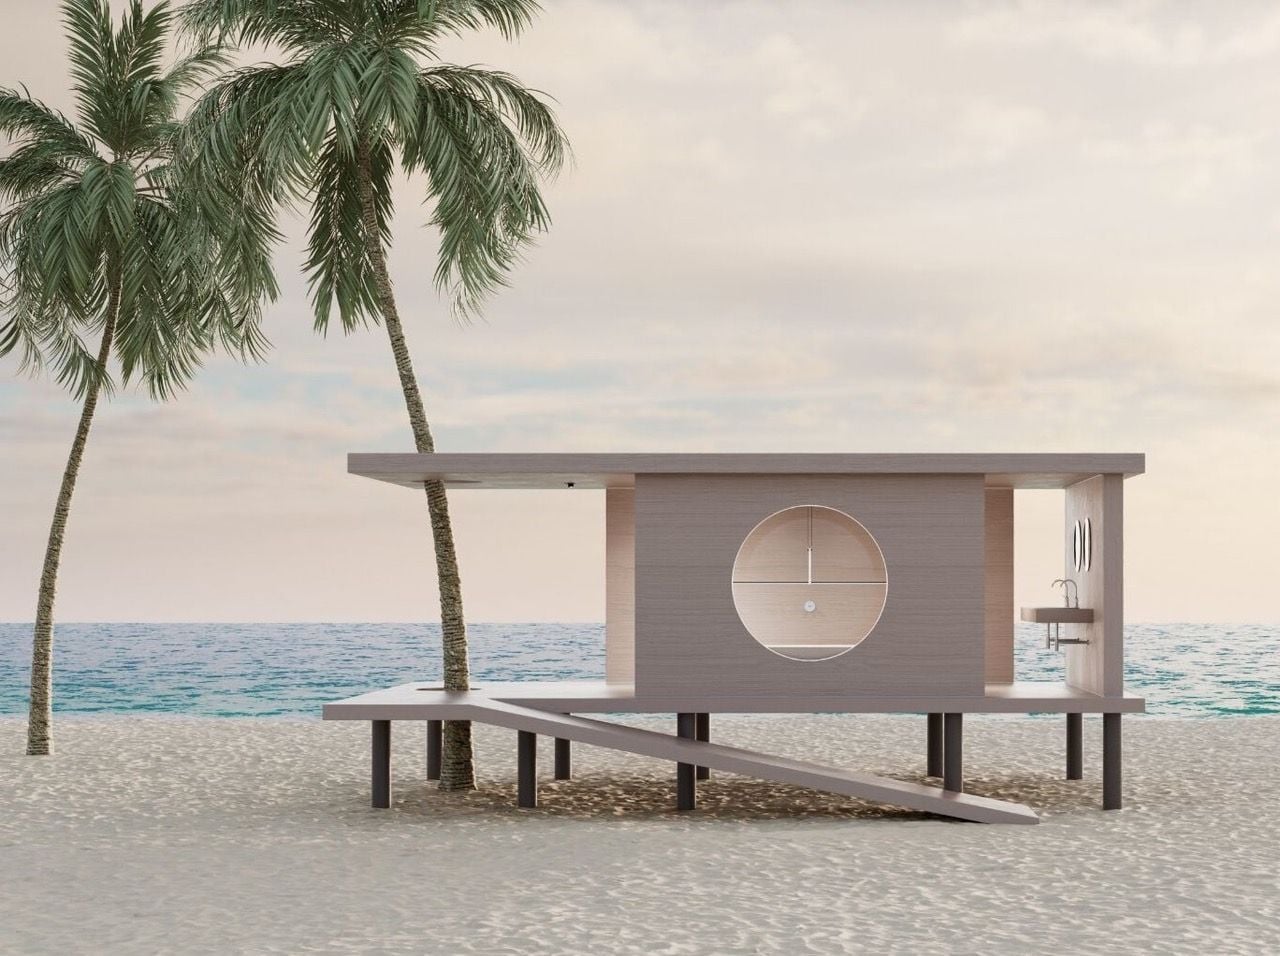 Bette-designed bathroom envisioned on a sandy white beach in Miami, as featured in the company's new BettePlaces campaign.